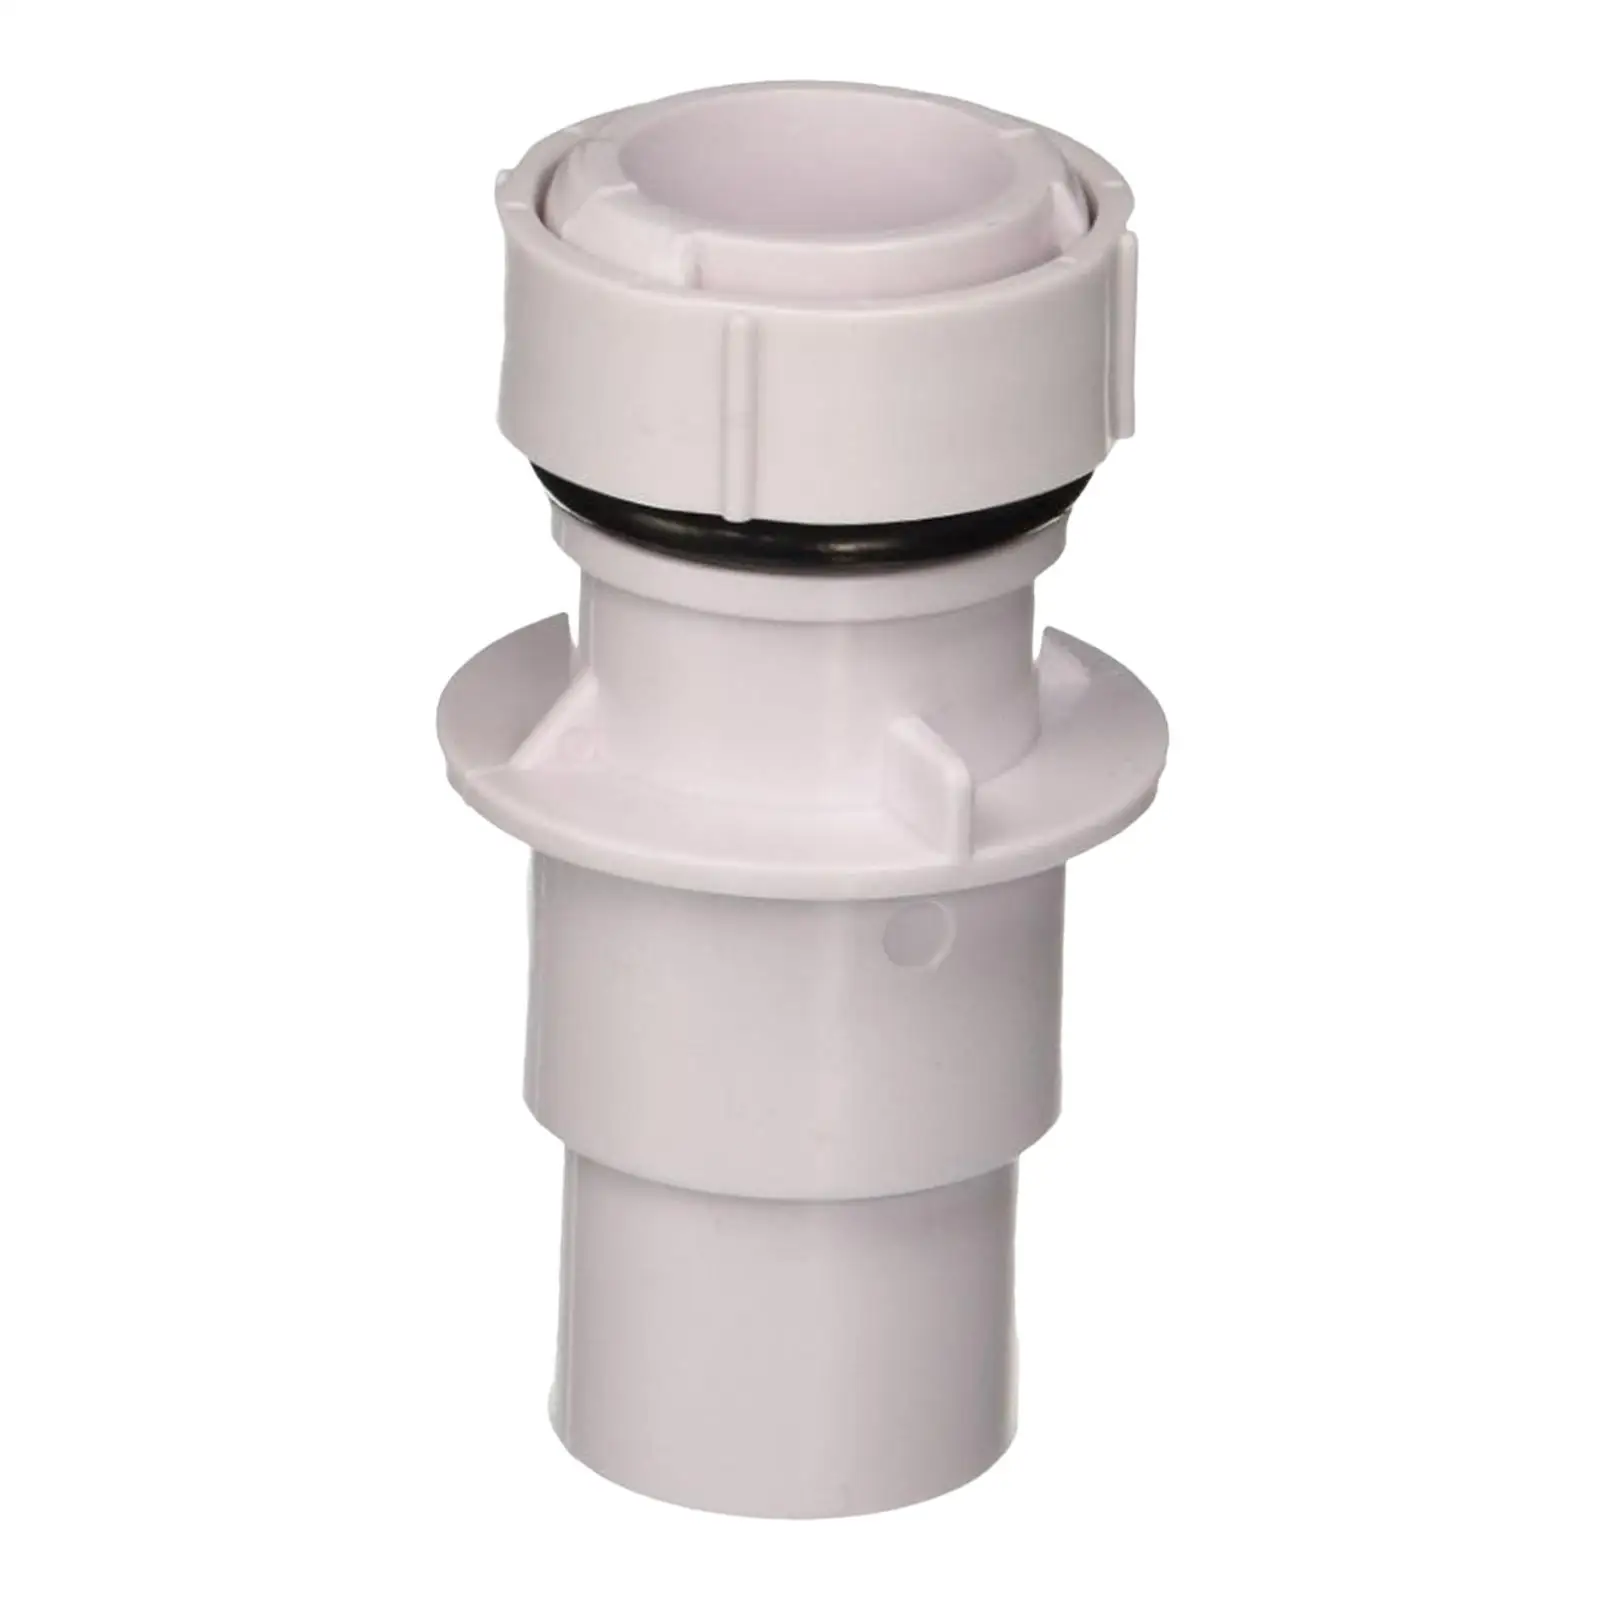 above Ground Pool Hose Coupling Durable Quick Connect Lightweight Pool Fittings for Filter Skimmer Plumbing Connection Supplies